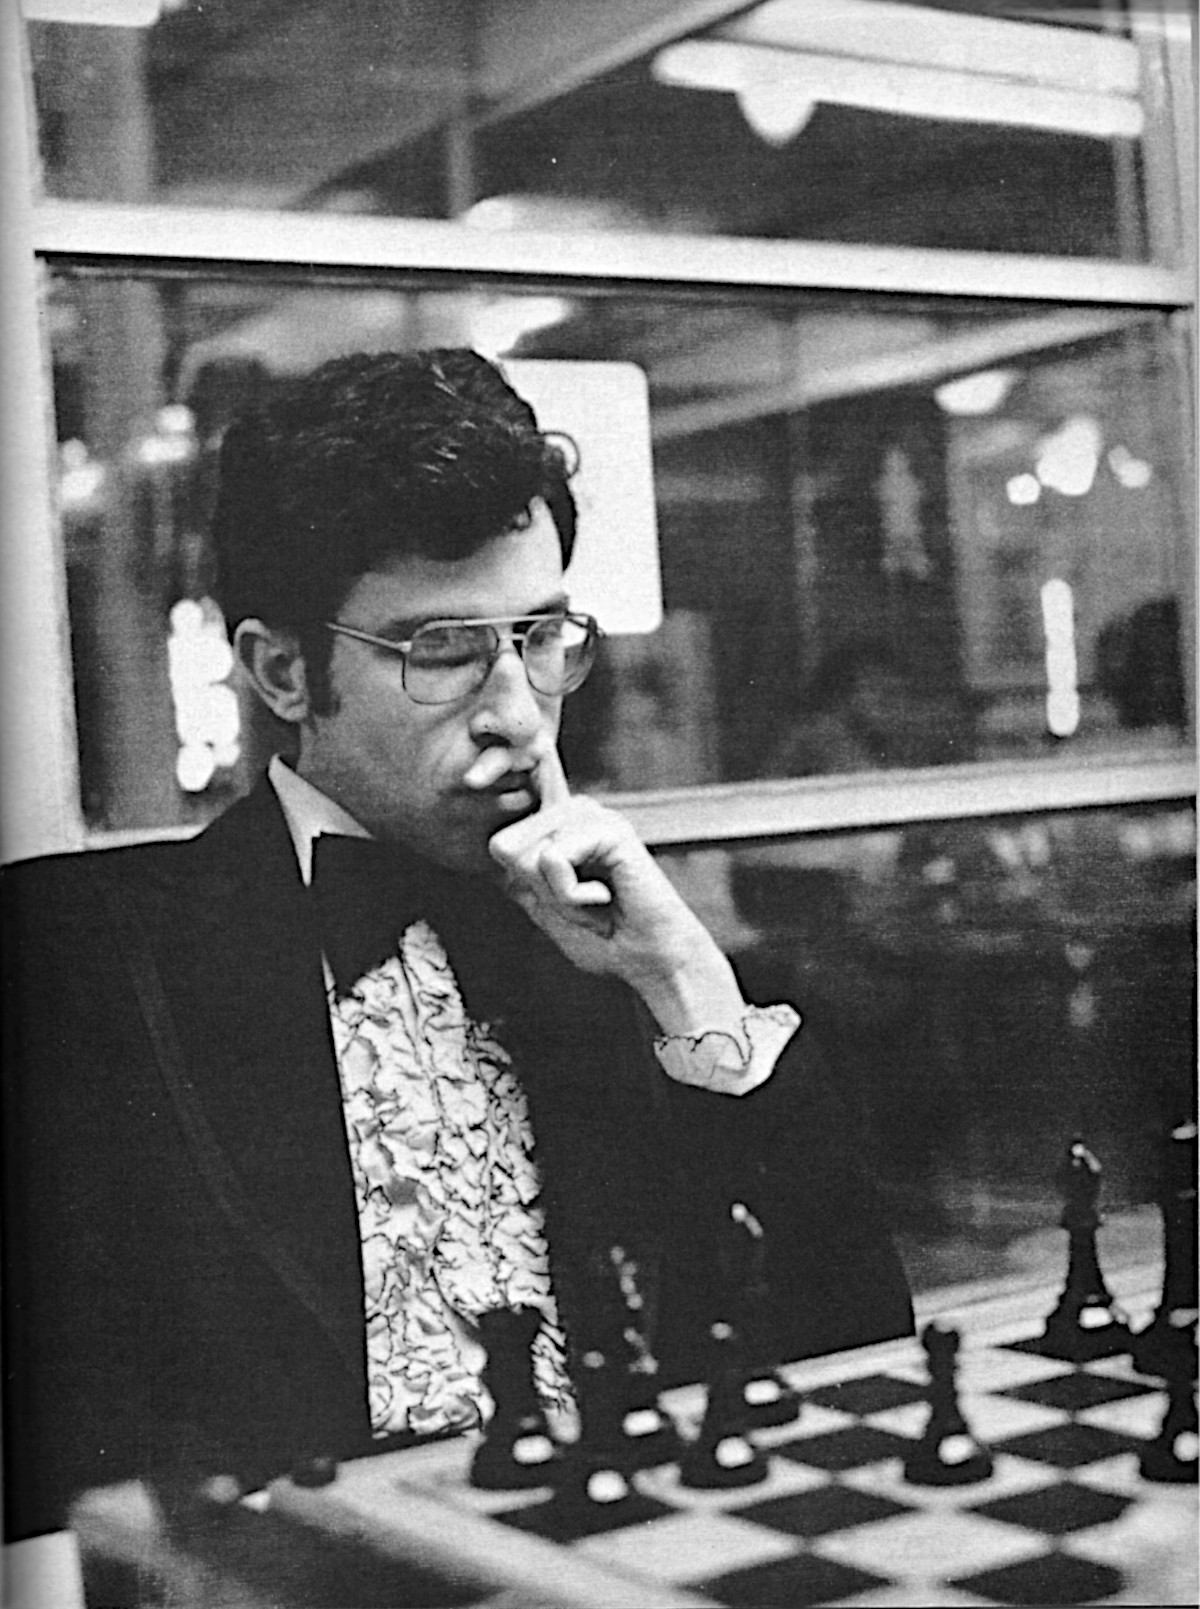 David Levy plays on-line chess against a Control Data Corporation Cyber 176 computer, running Chess 4.7, at the Canadian National Exhibition in Toronto. From Byte, December 1978